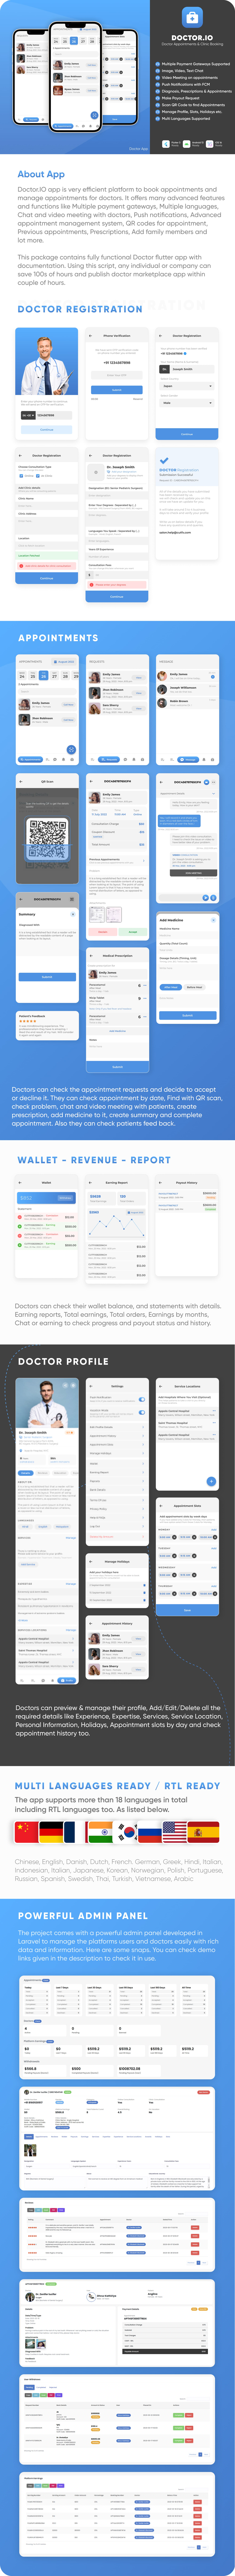 Doctor.io : Doctor App for Doctors Appointments Managements, Online Diagnostics - 1